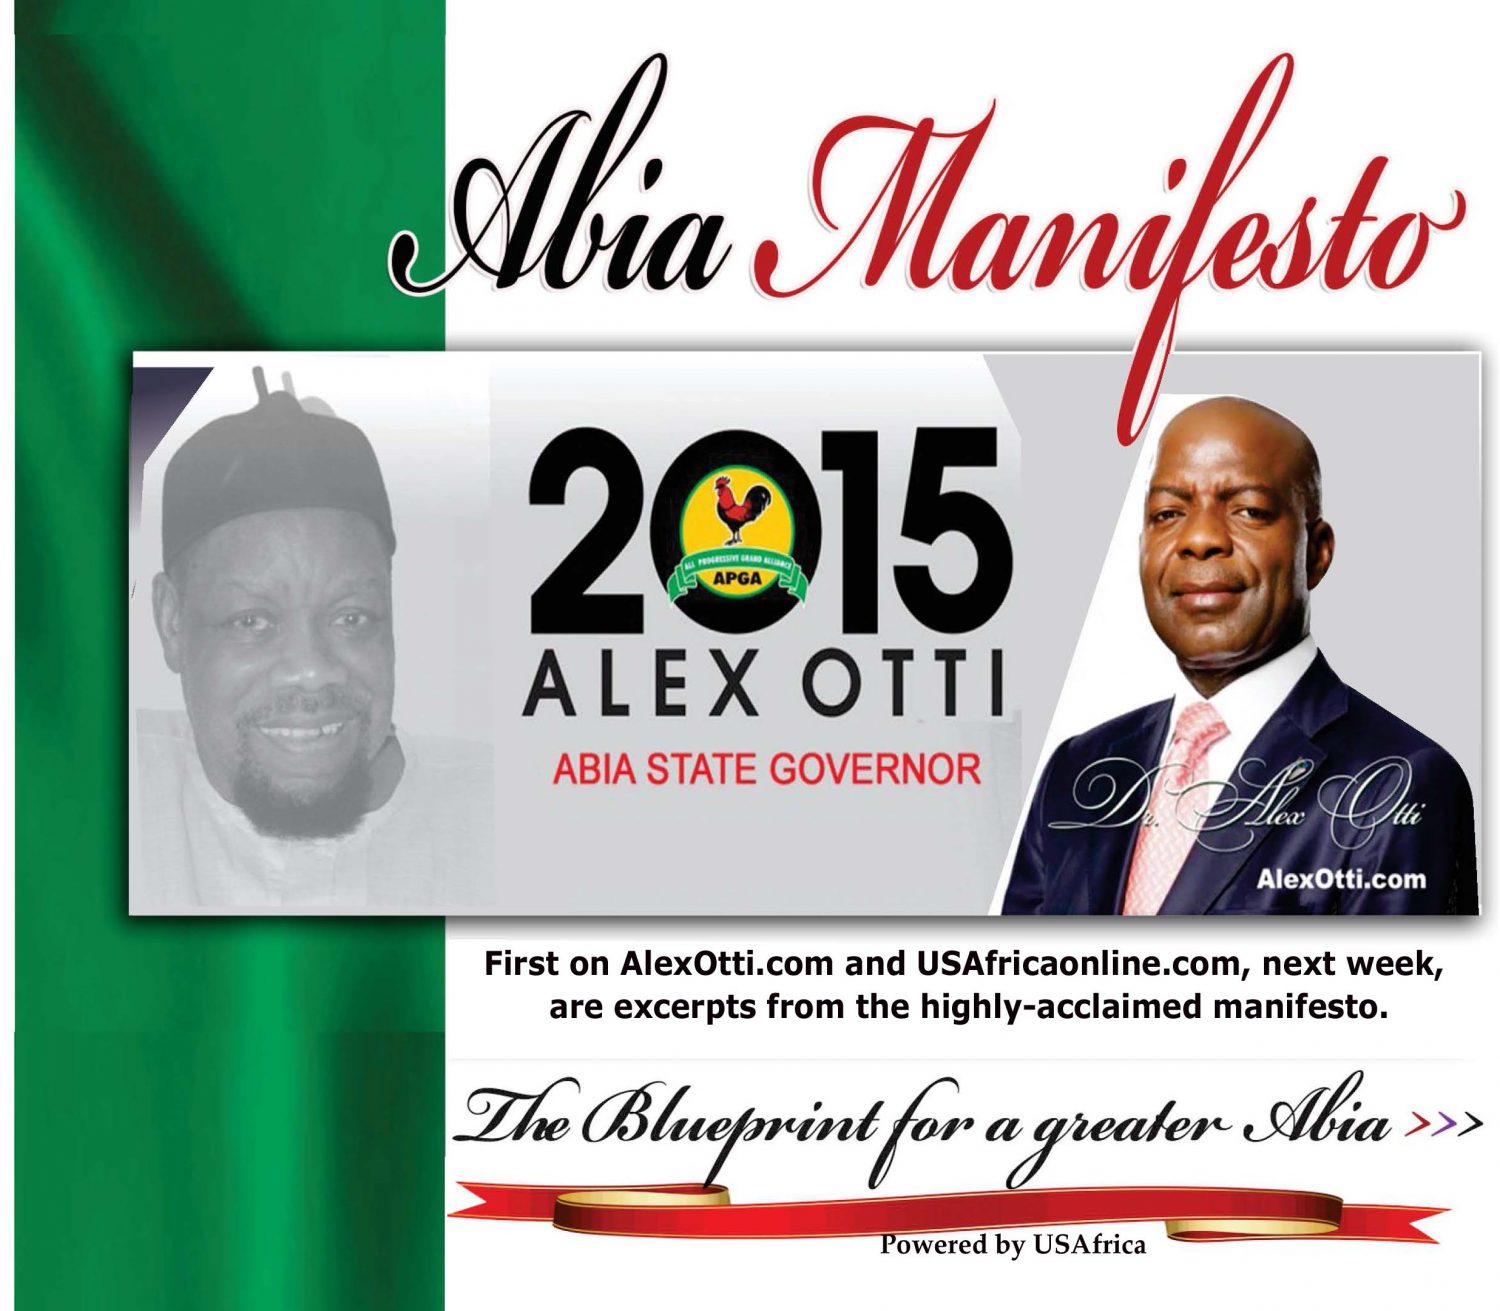 Alex Otti's Abia Manifesto to be excerpted first on USAfricaonline.com, next week